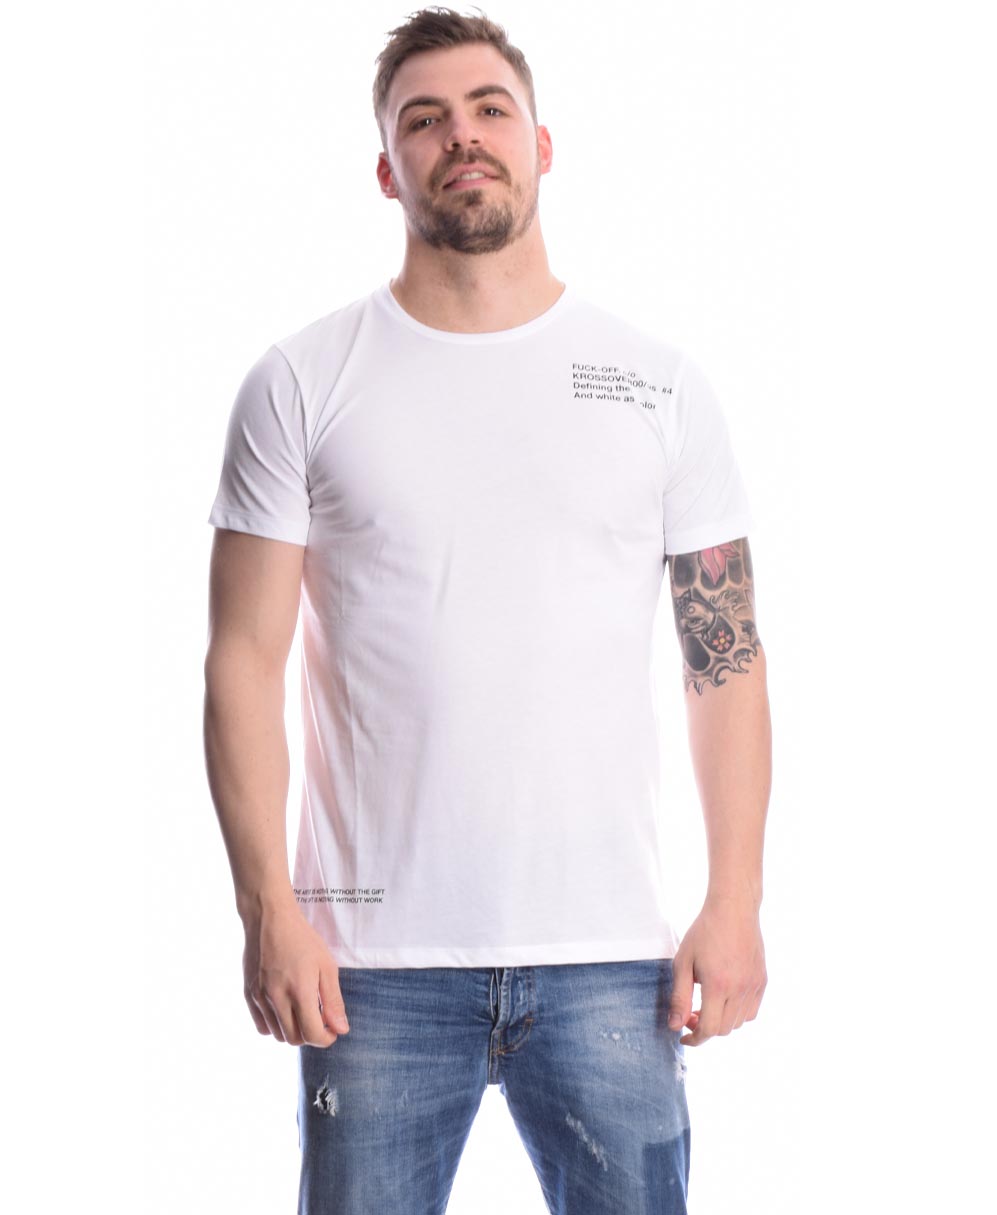 hand of god cross over fingers t-shirt made in italy by imperial fashion 2021